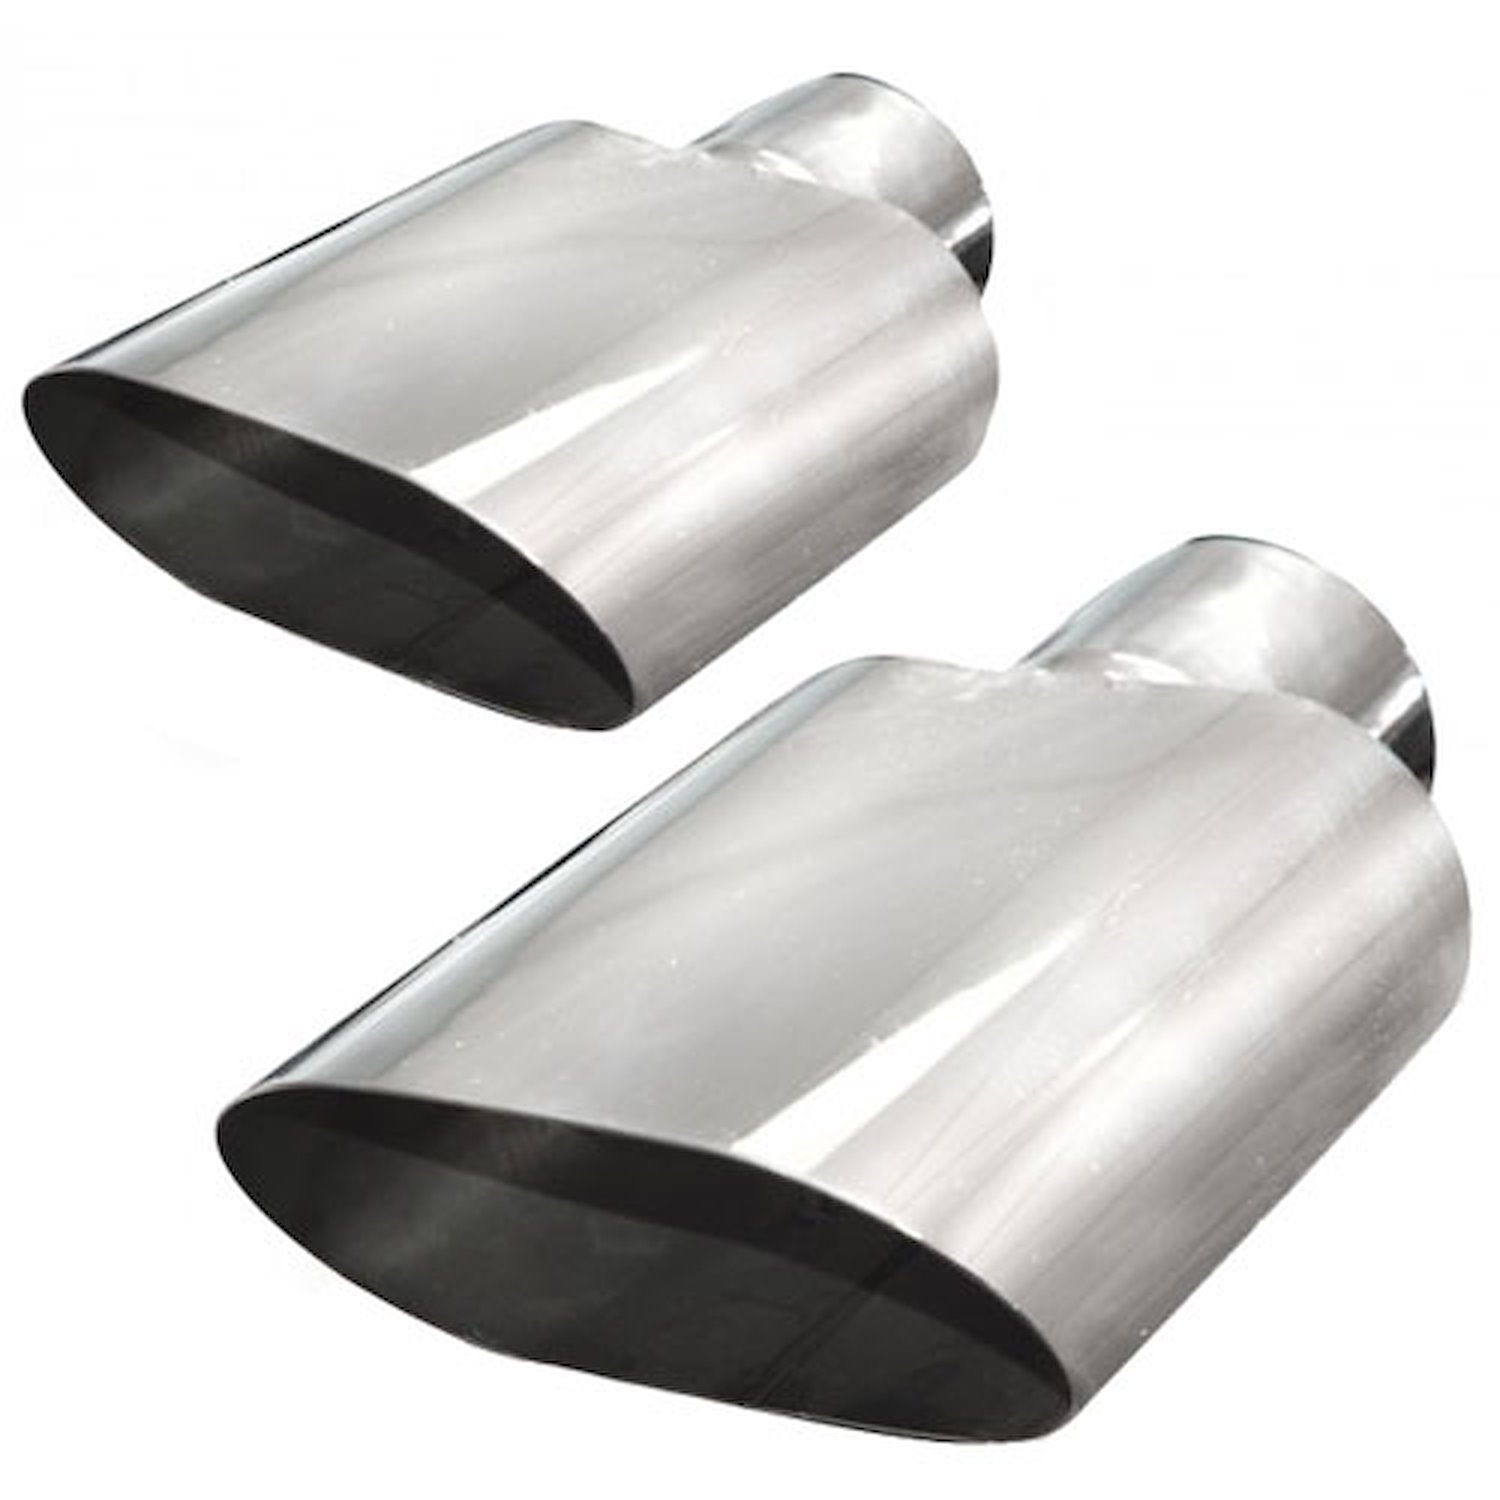 Big Oval Tips - 35 Degree Angle Cut - Inlet: 2.5"